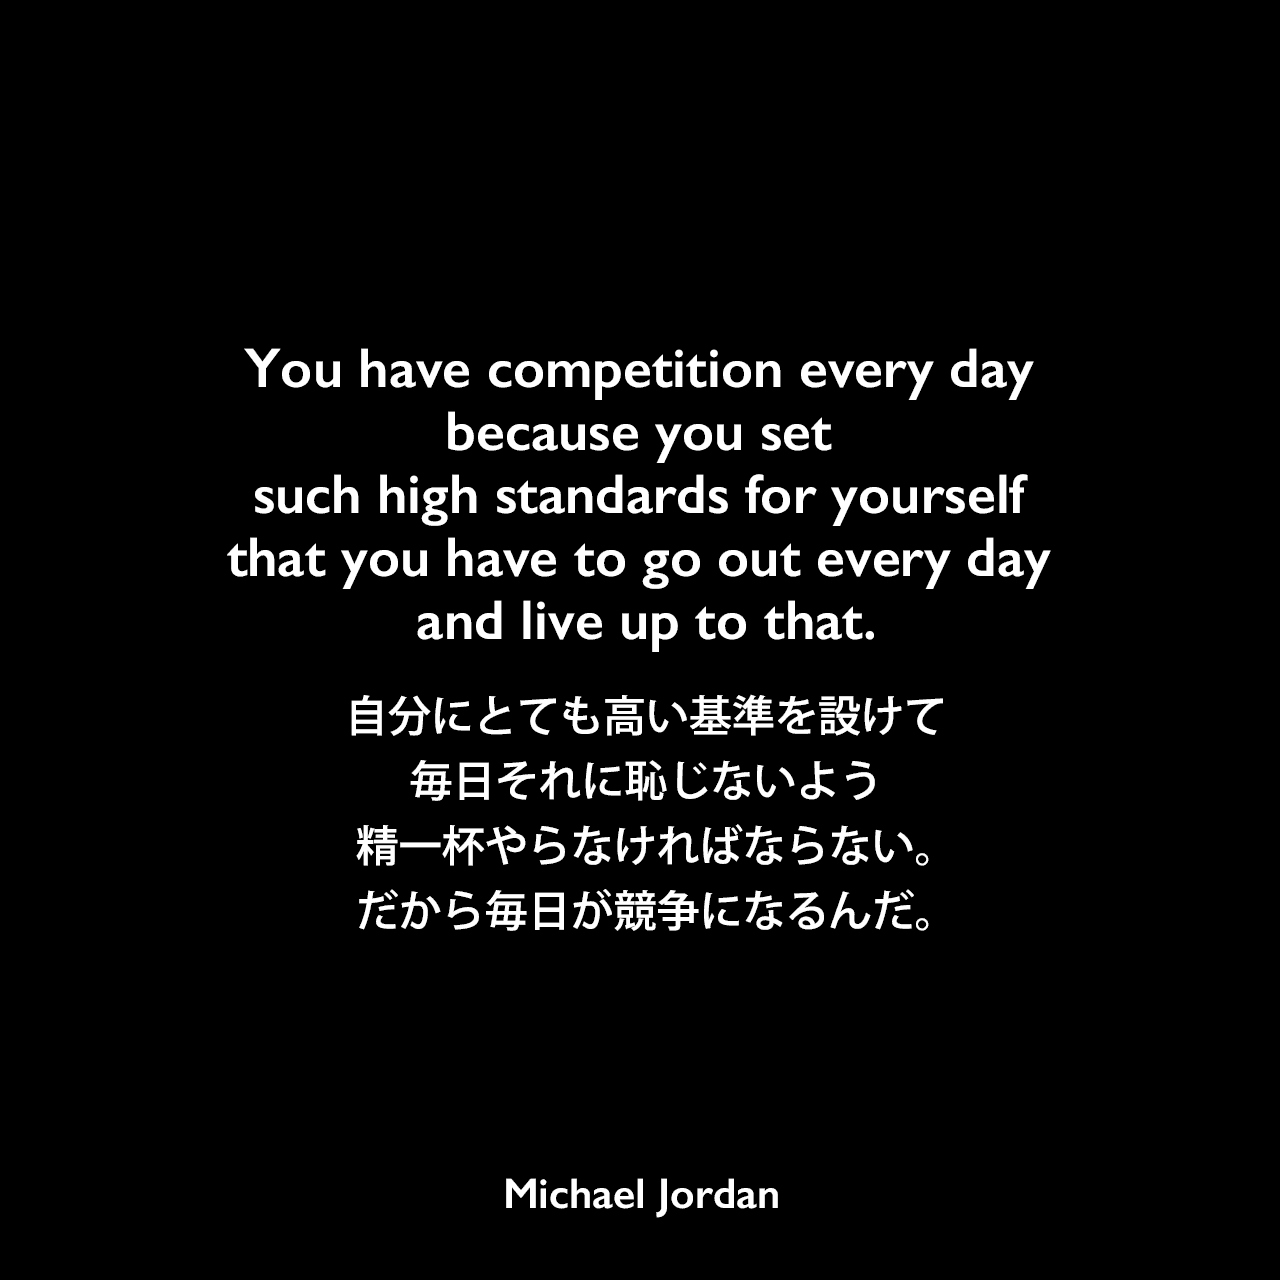 You have competition every day because you set such high standards for yourself that you have to go out every day and live up to that.自分にとても高い基準を設けて、毎日それに恥じないよう精一杯やらなければならない。だから毎日が競争になるんだ。Michael Jordan